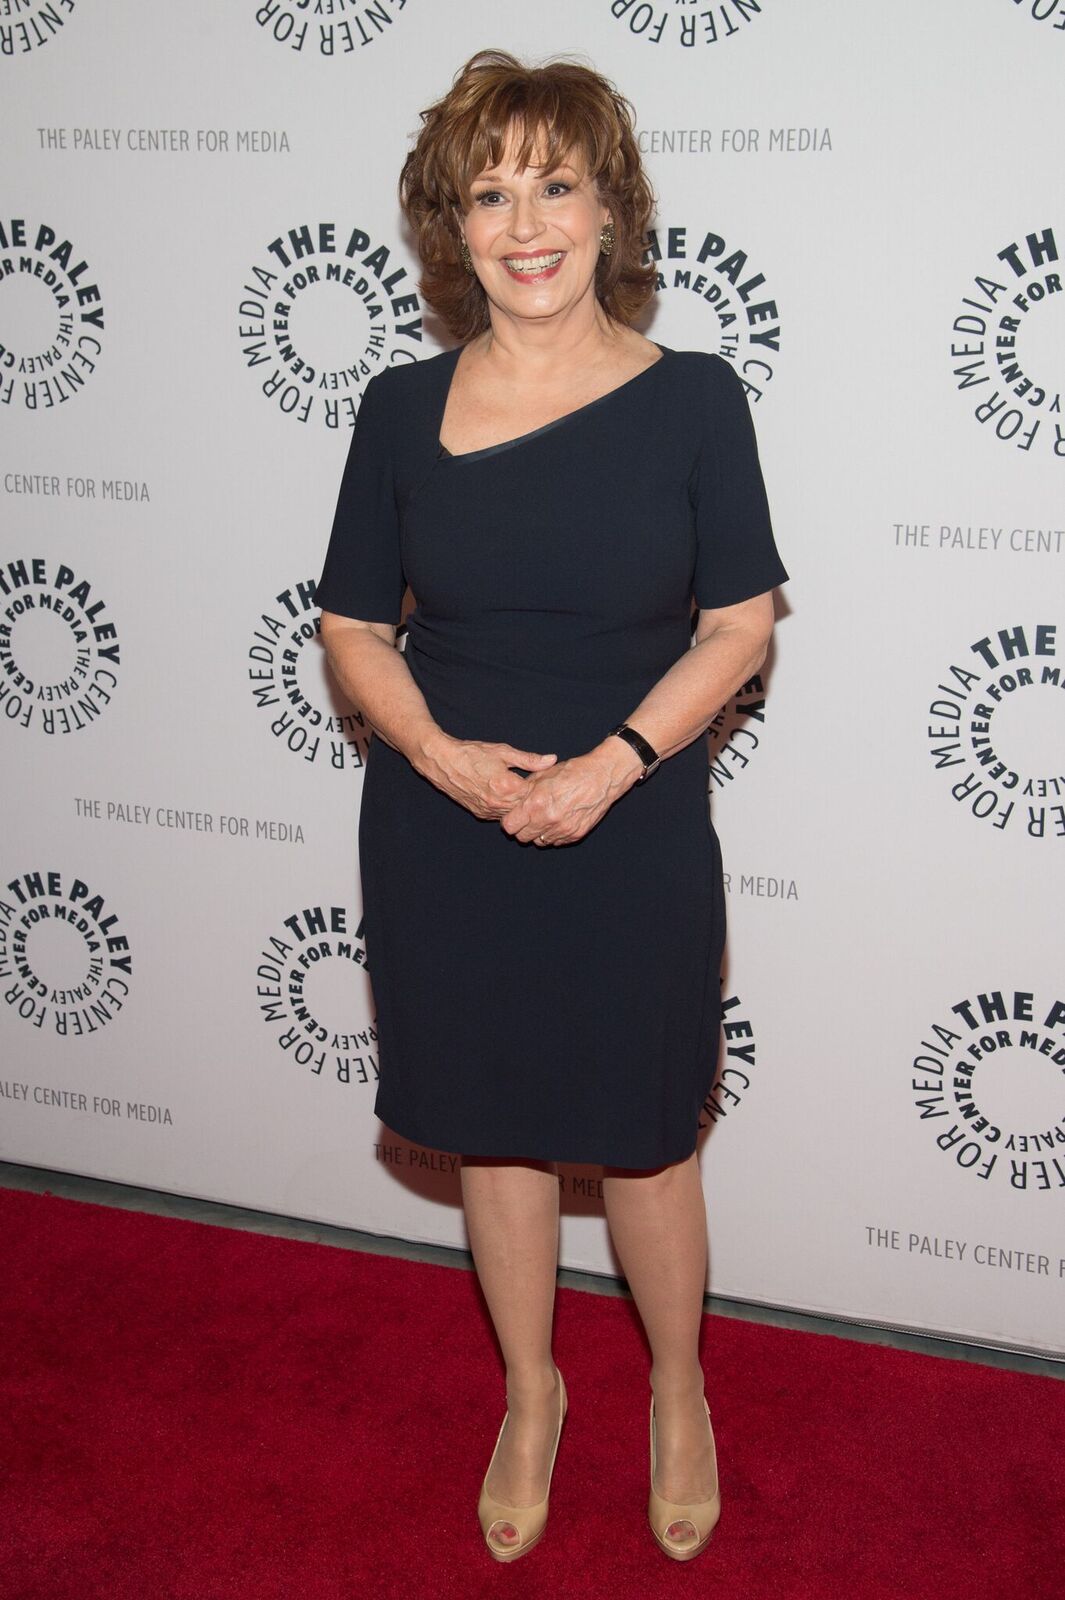 Joy Behar at "An evening with Ricky Gervais and Joy Behar" held at The Paley Center for Media on June 5, 2014, in New York City | Photo: Mark Sagliocco/Getty Images